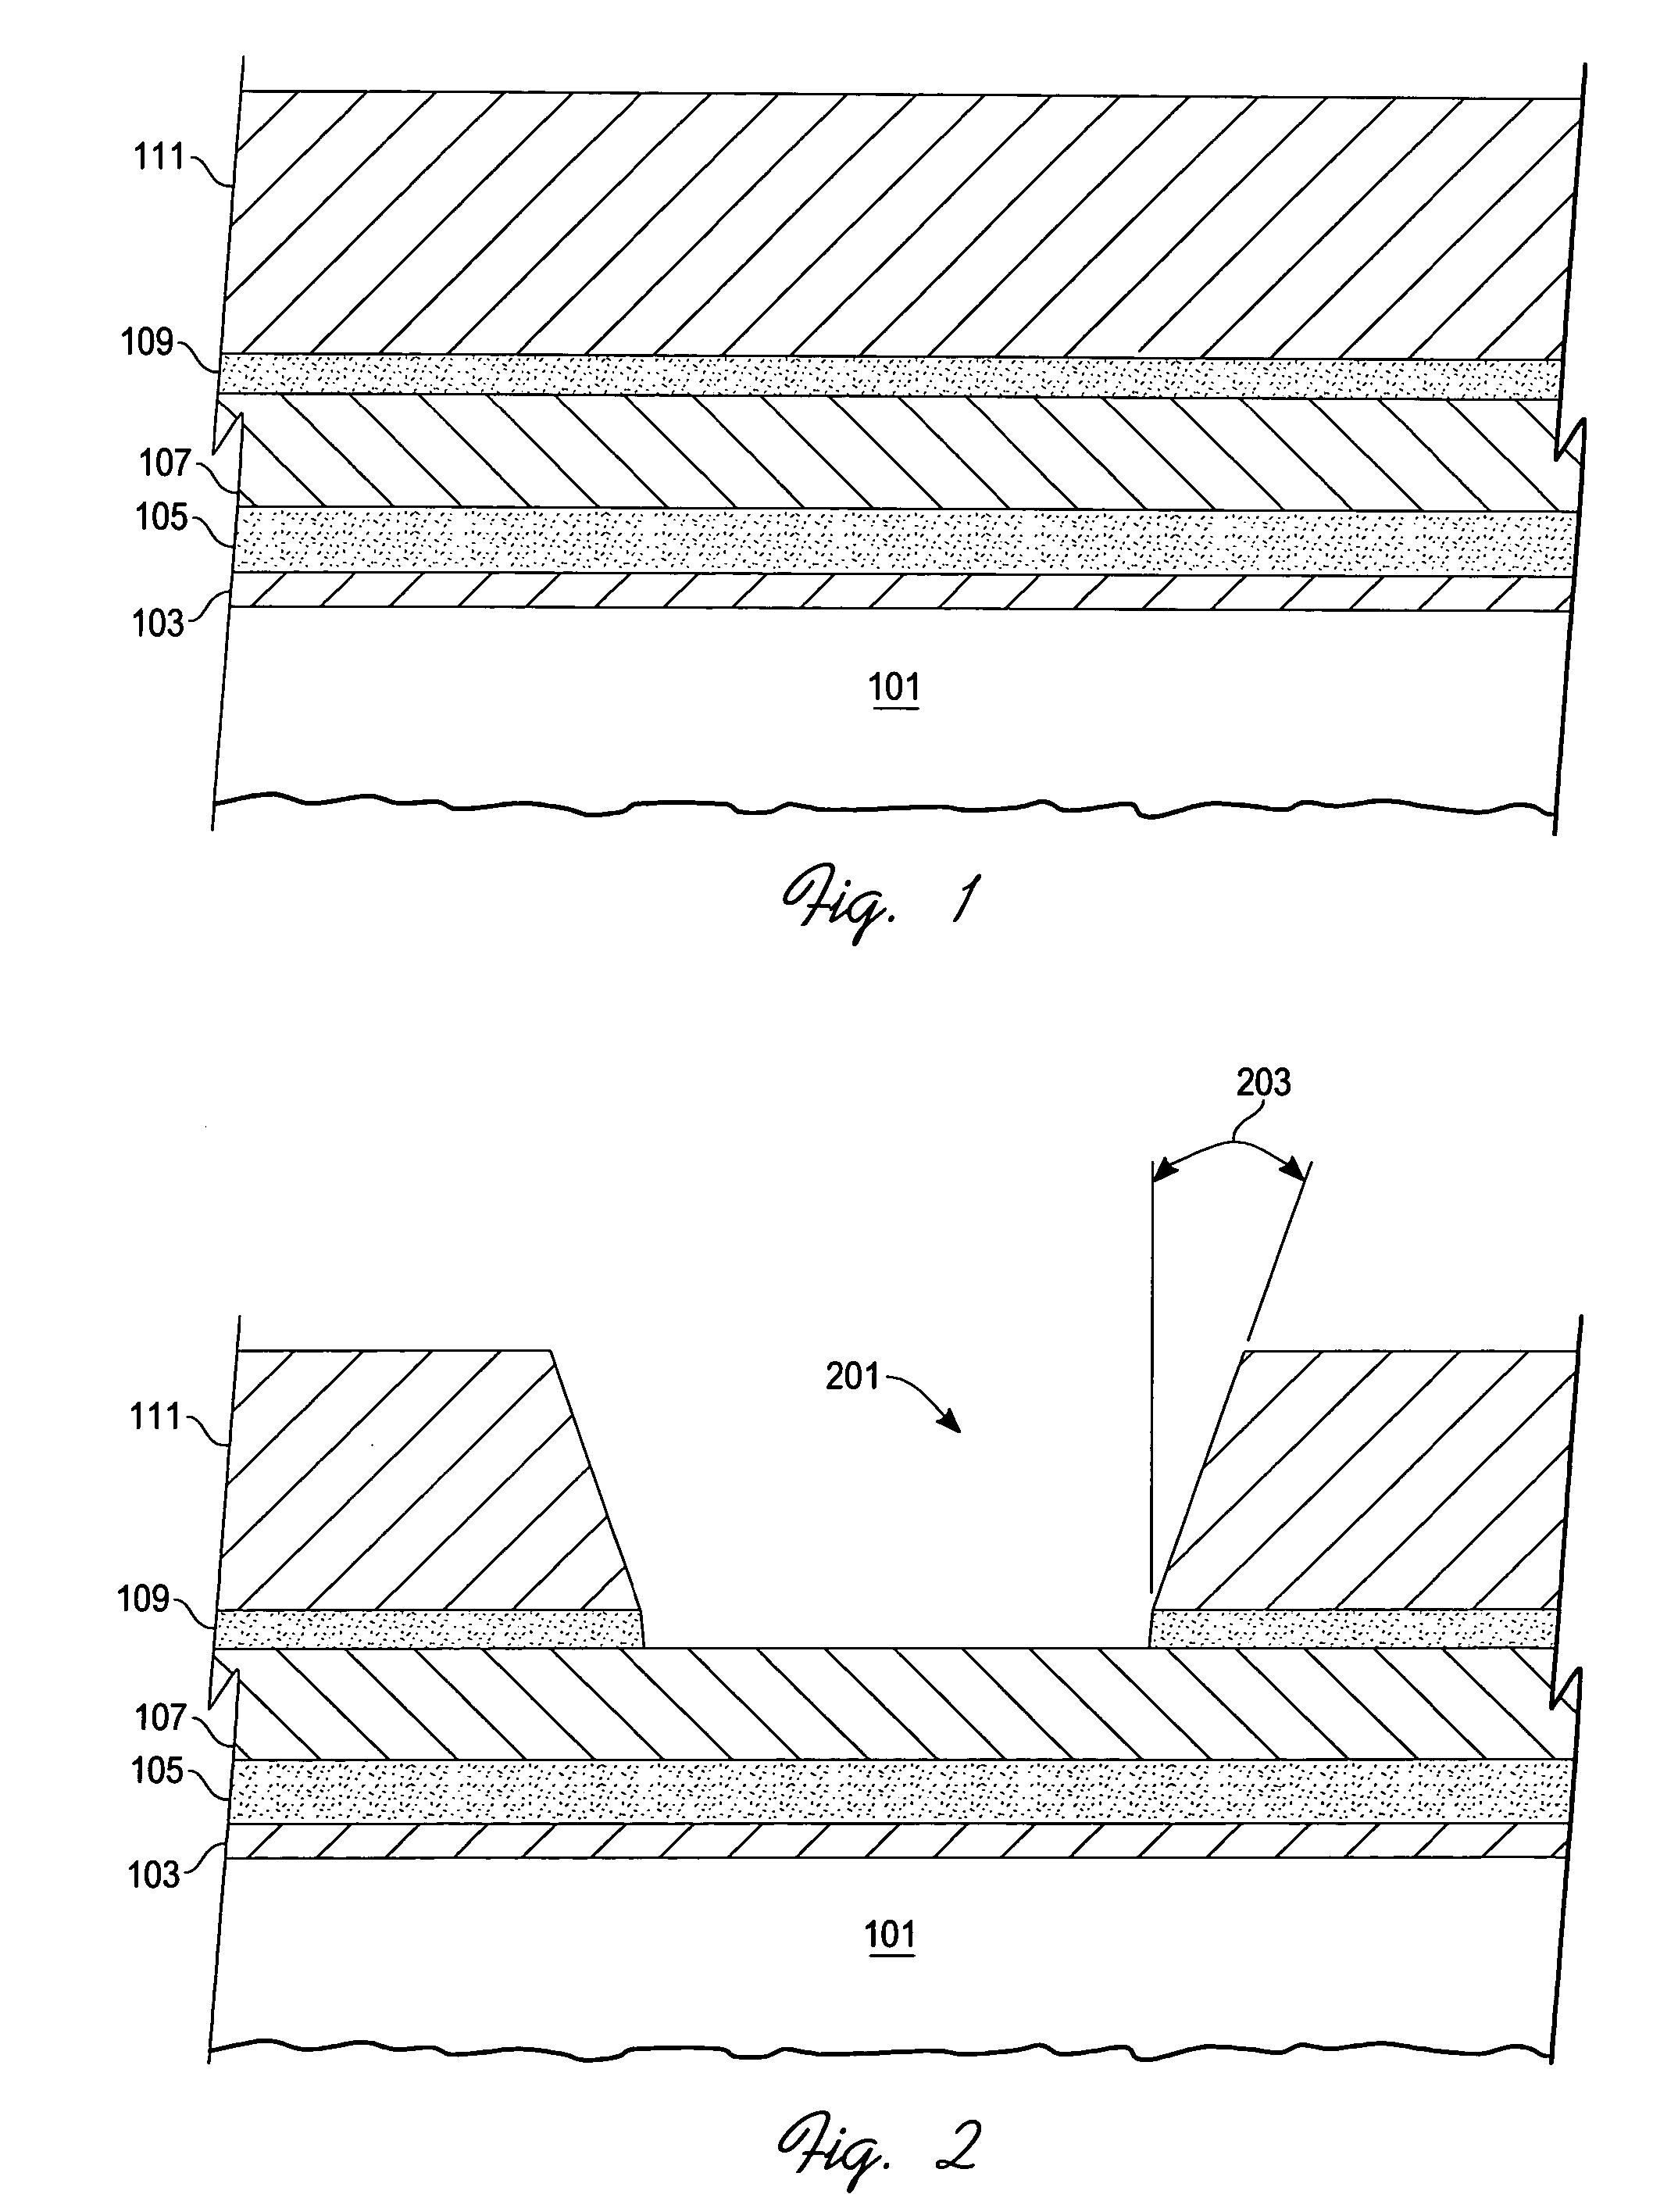 Semiconductor device with a toroidal-like junction